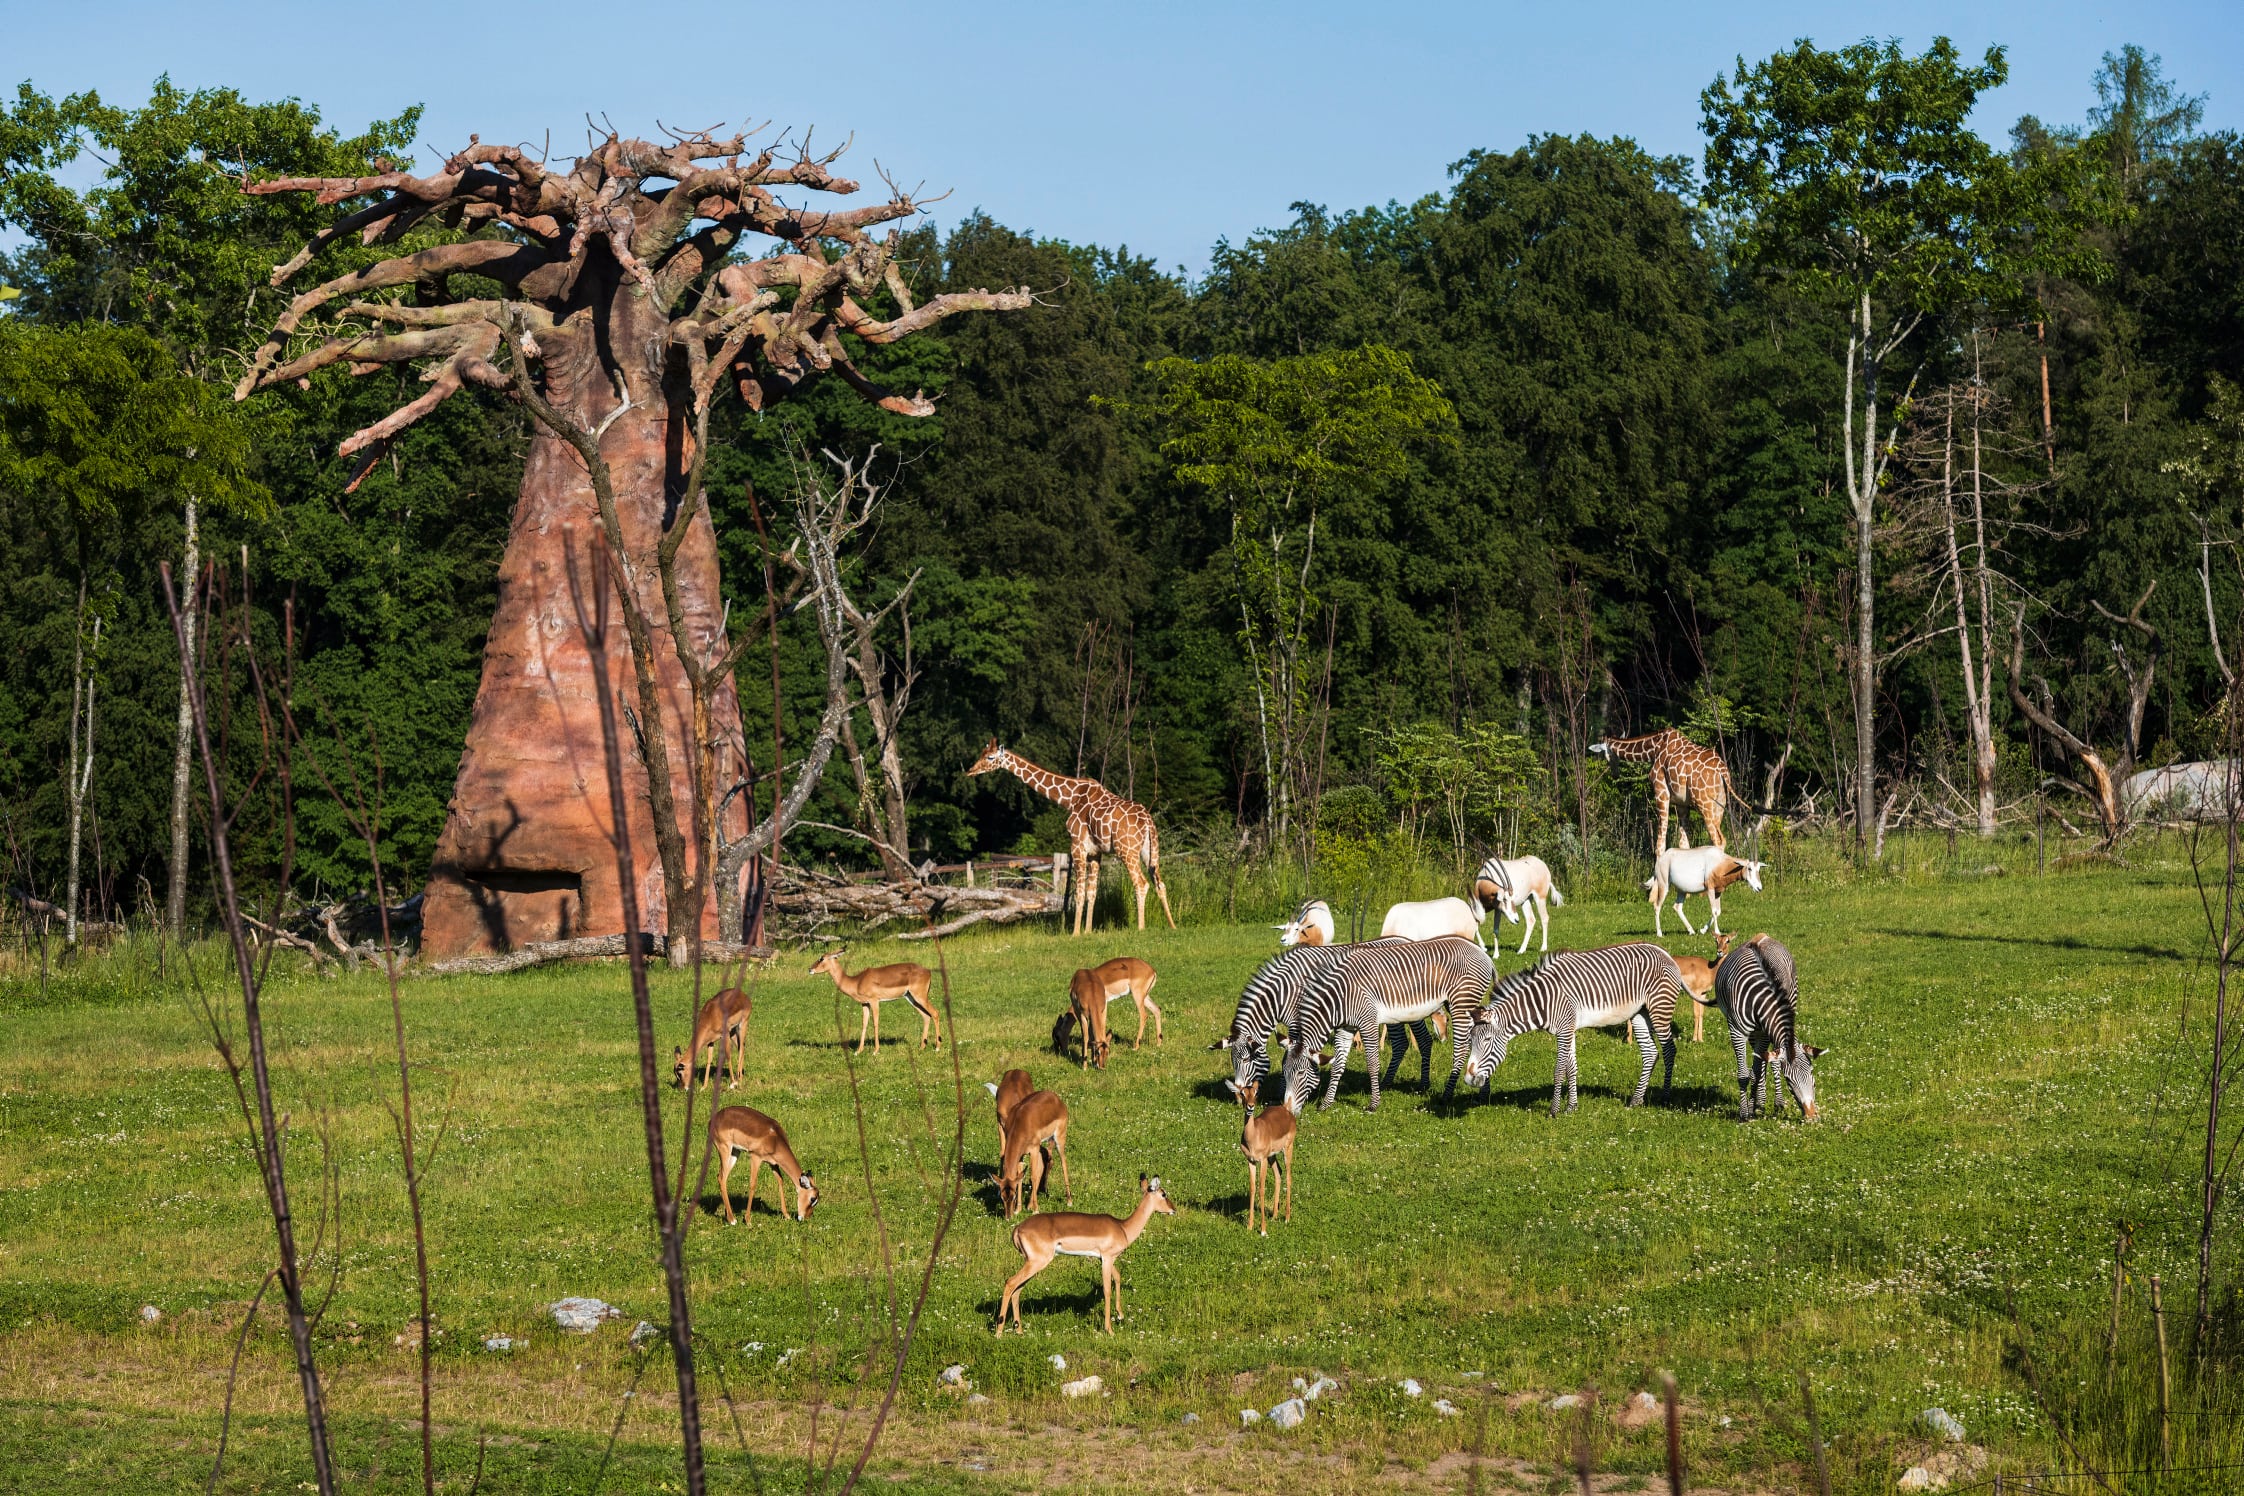 Celebrating Two Years of The Lewa Savanna Exhibit at Zoo Zurich!